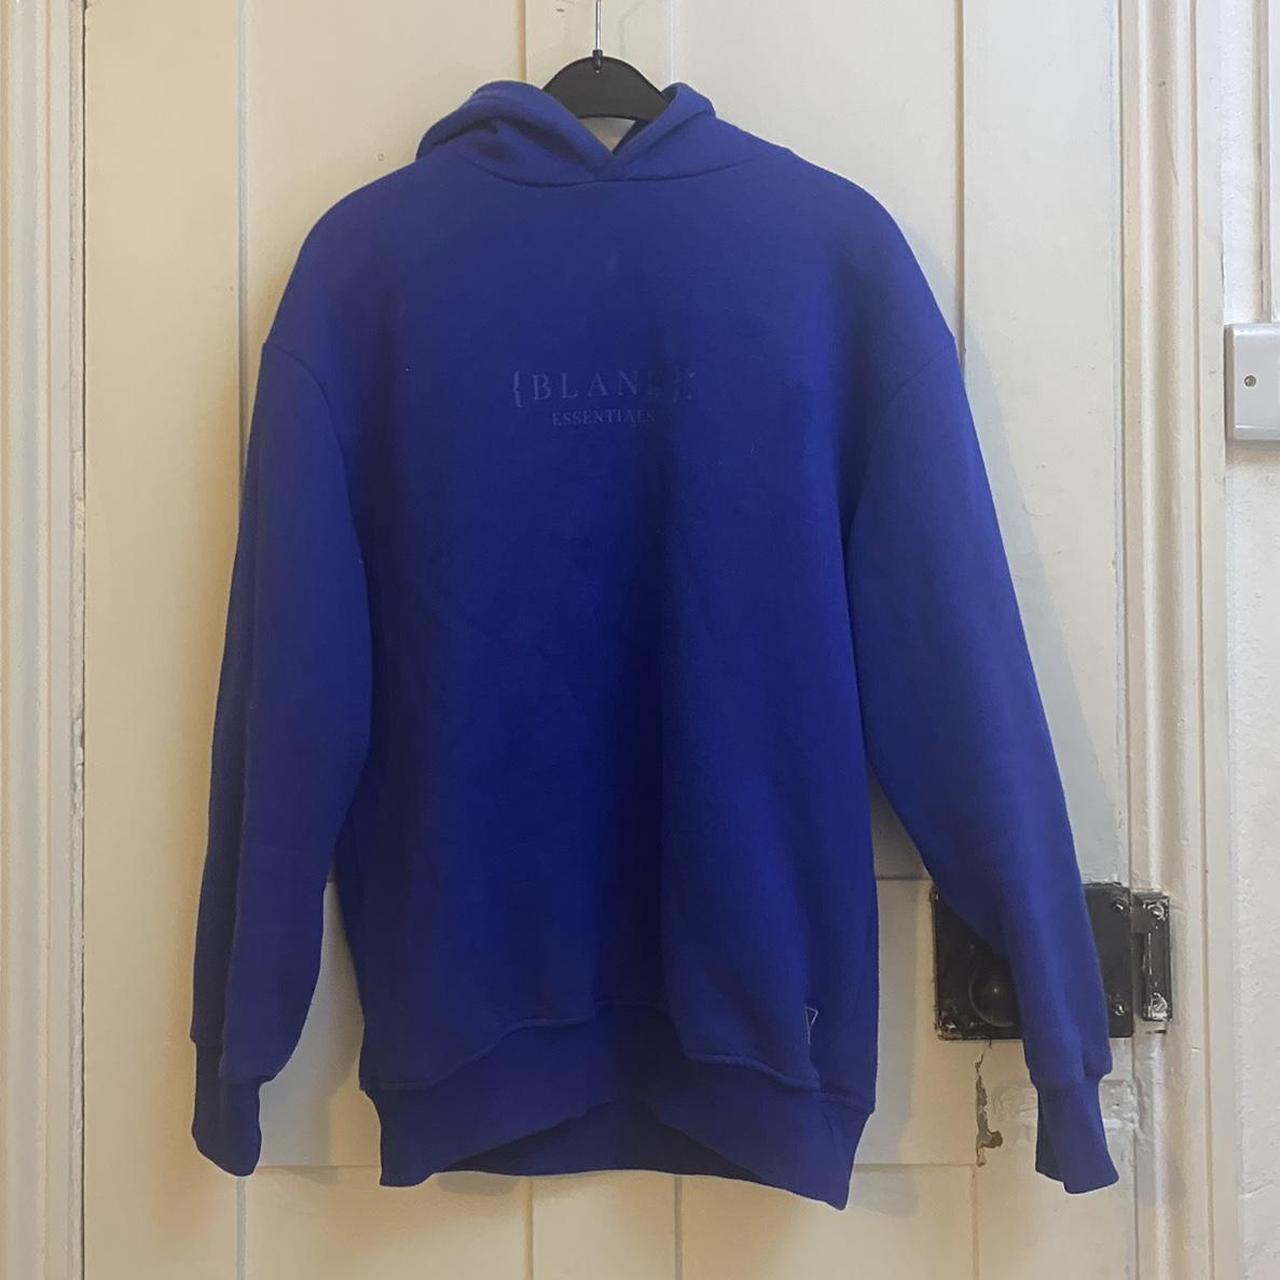 Blank Essentials hoodie Size - small Colour - blue - Depop